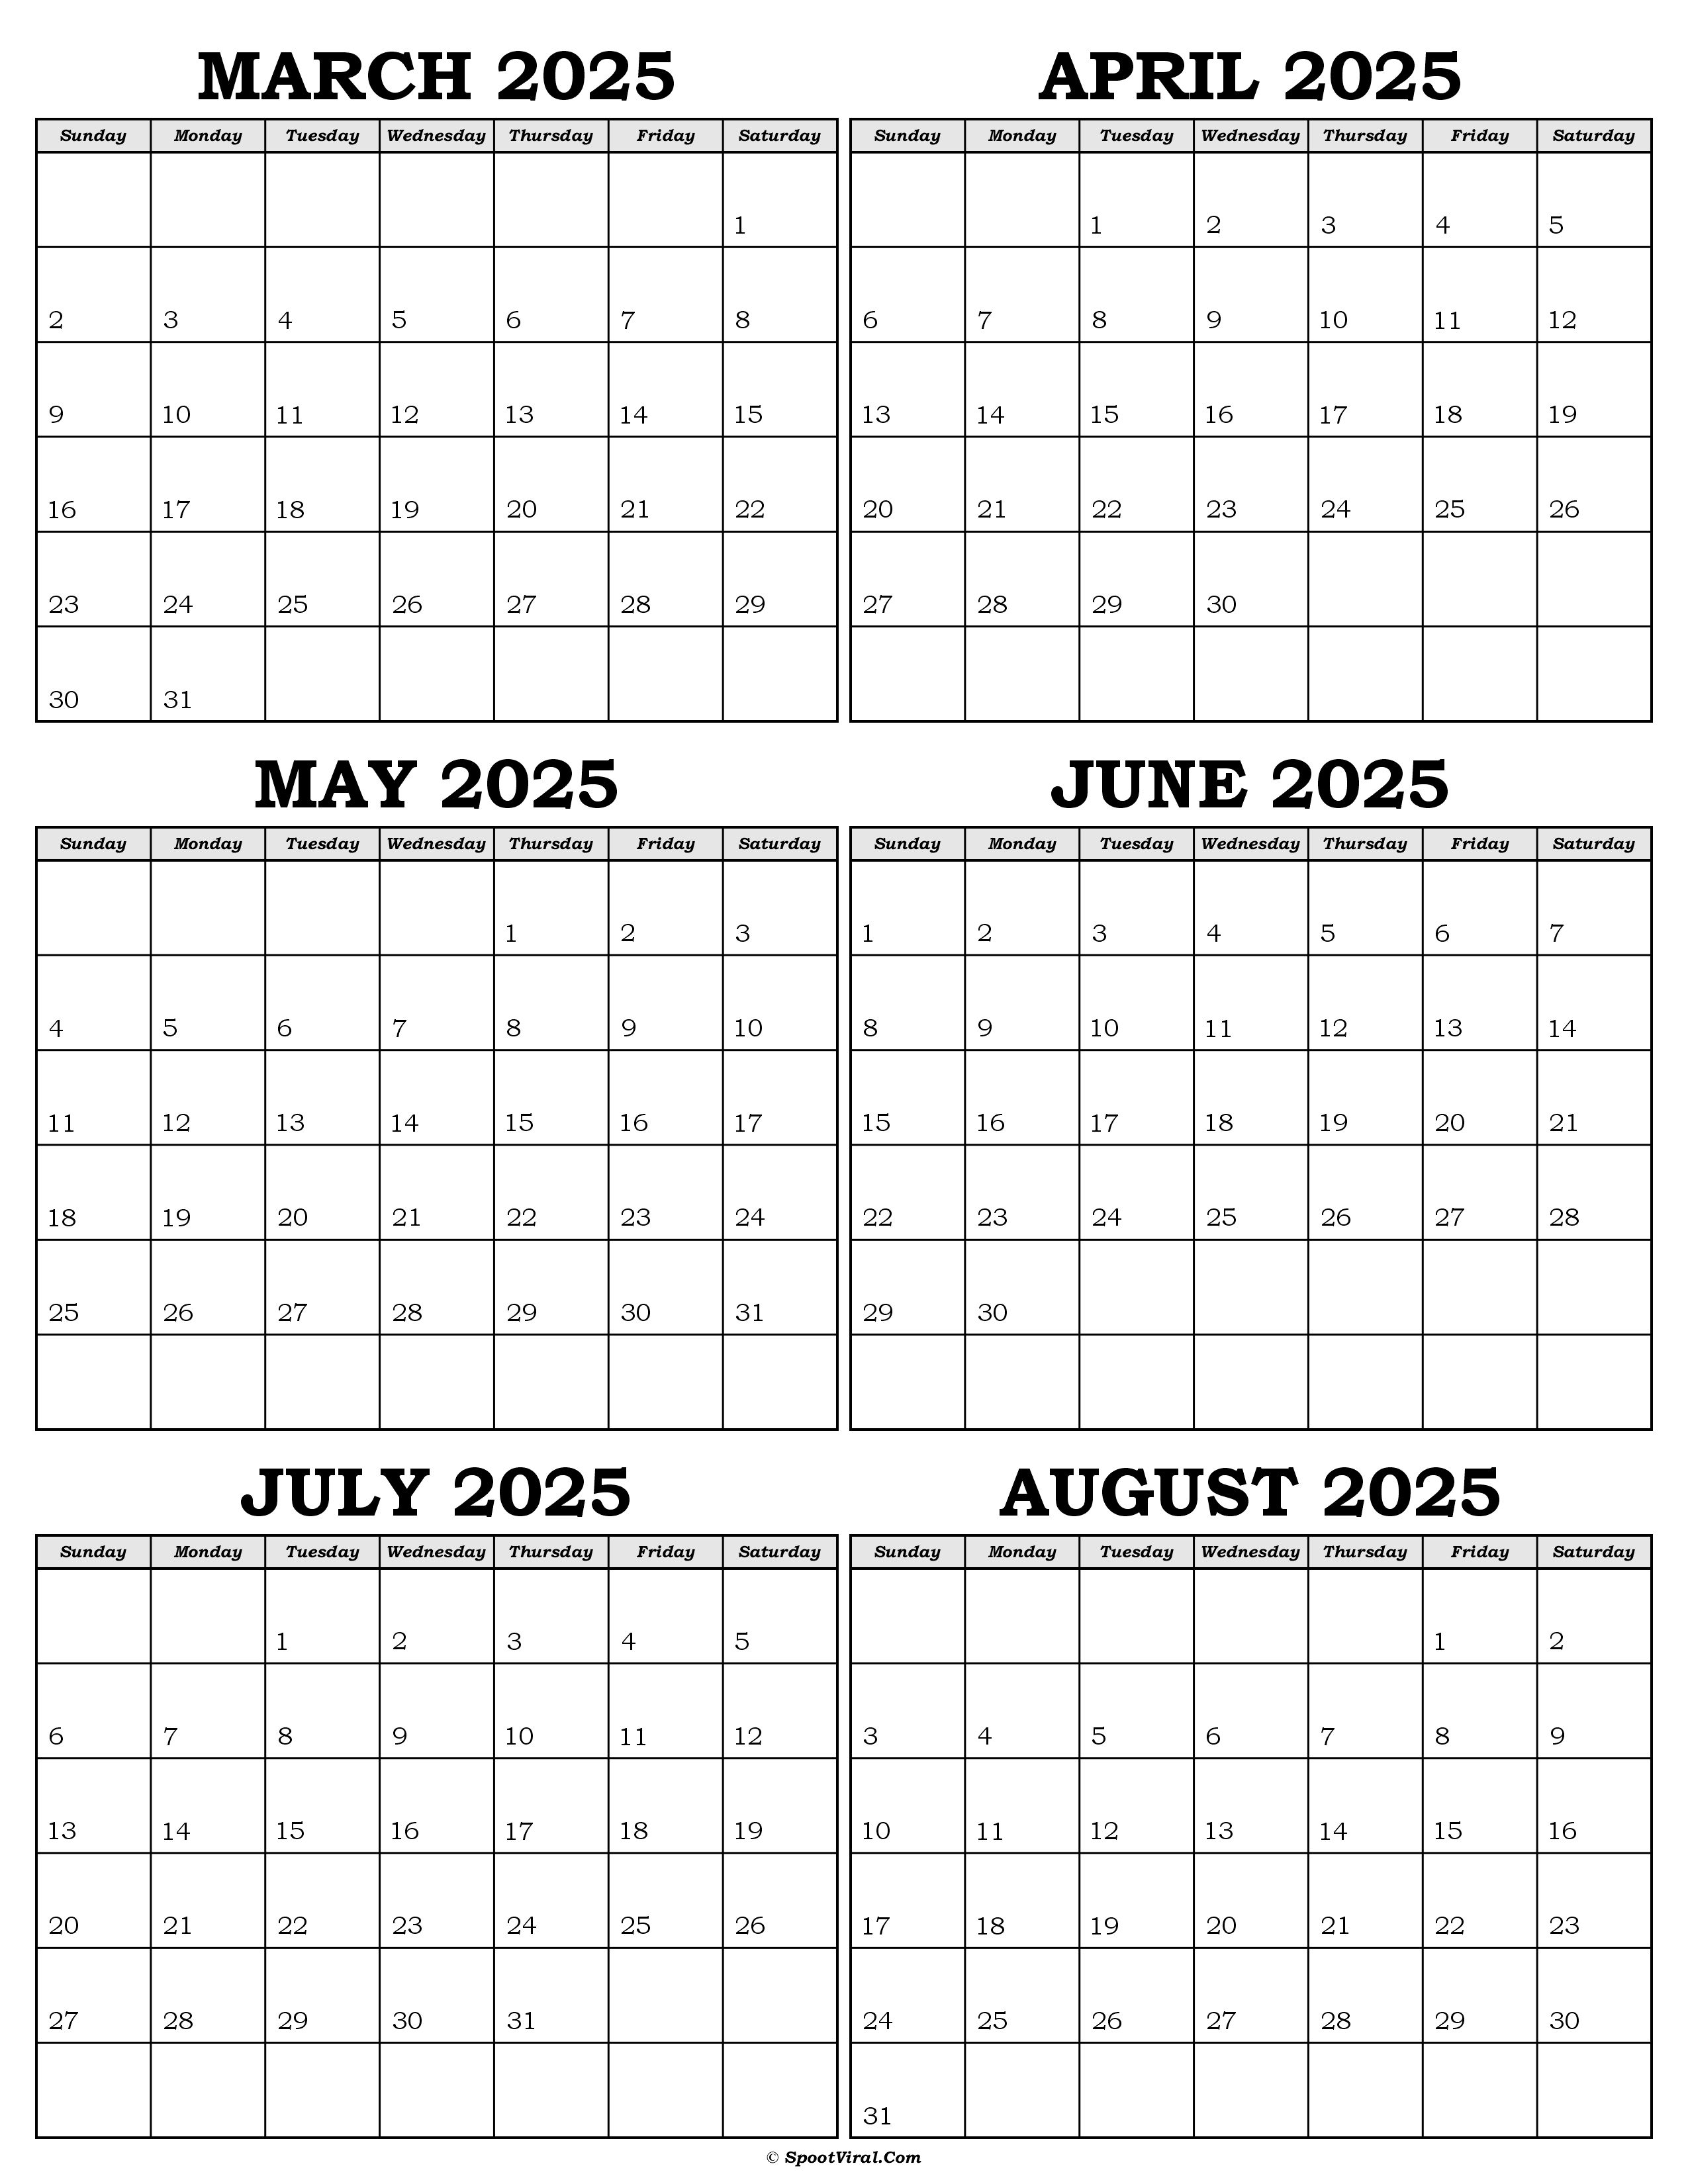 Calendar March to August 2025